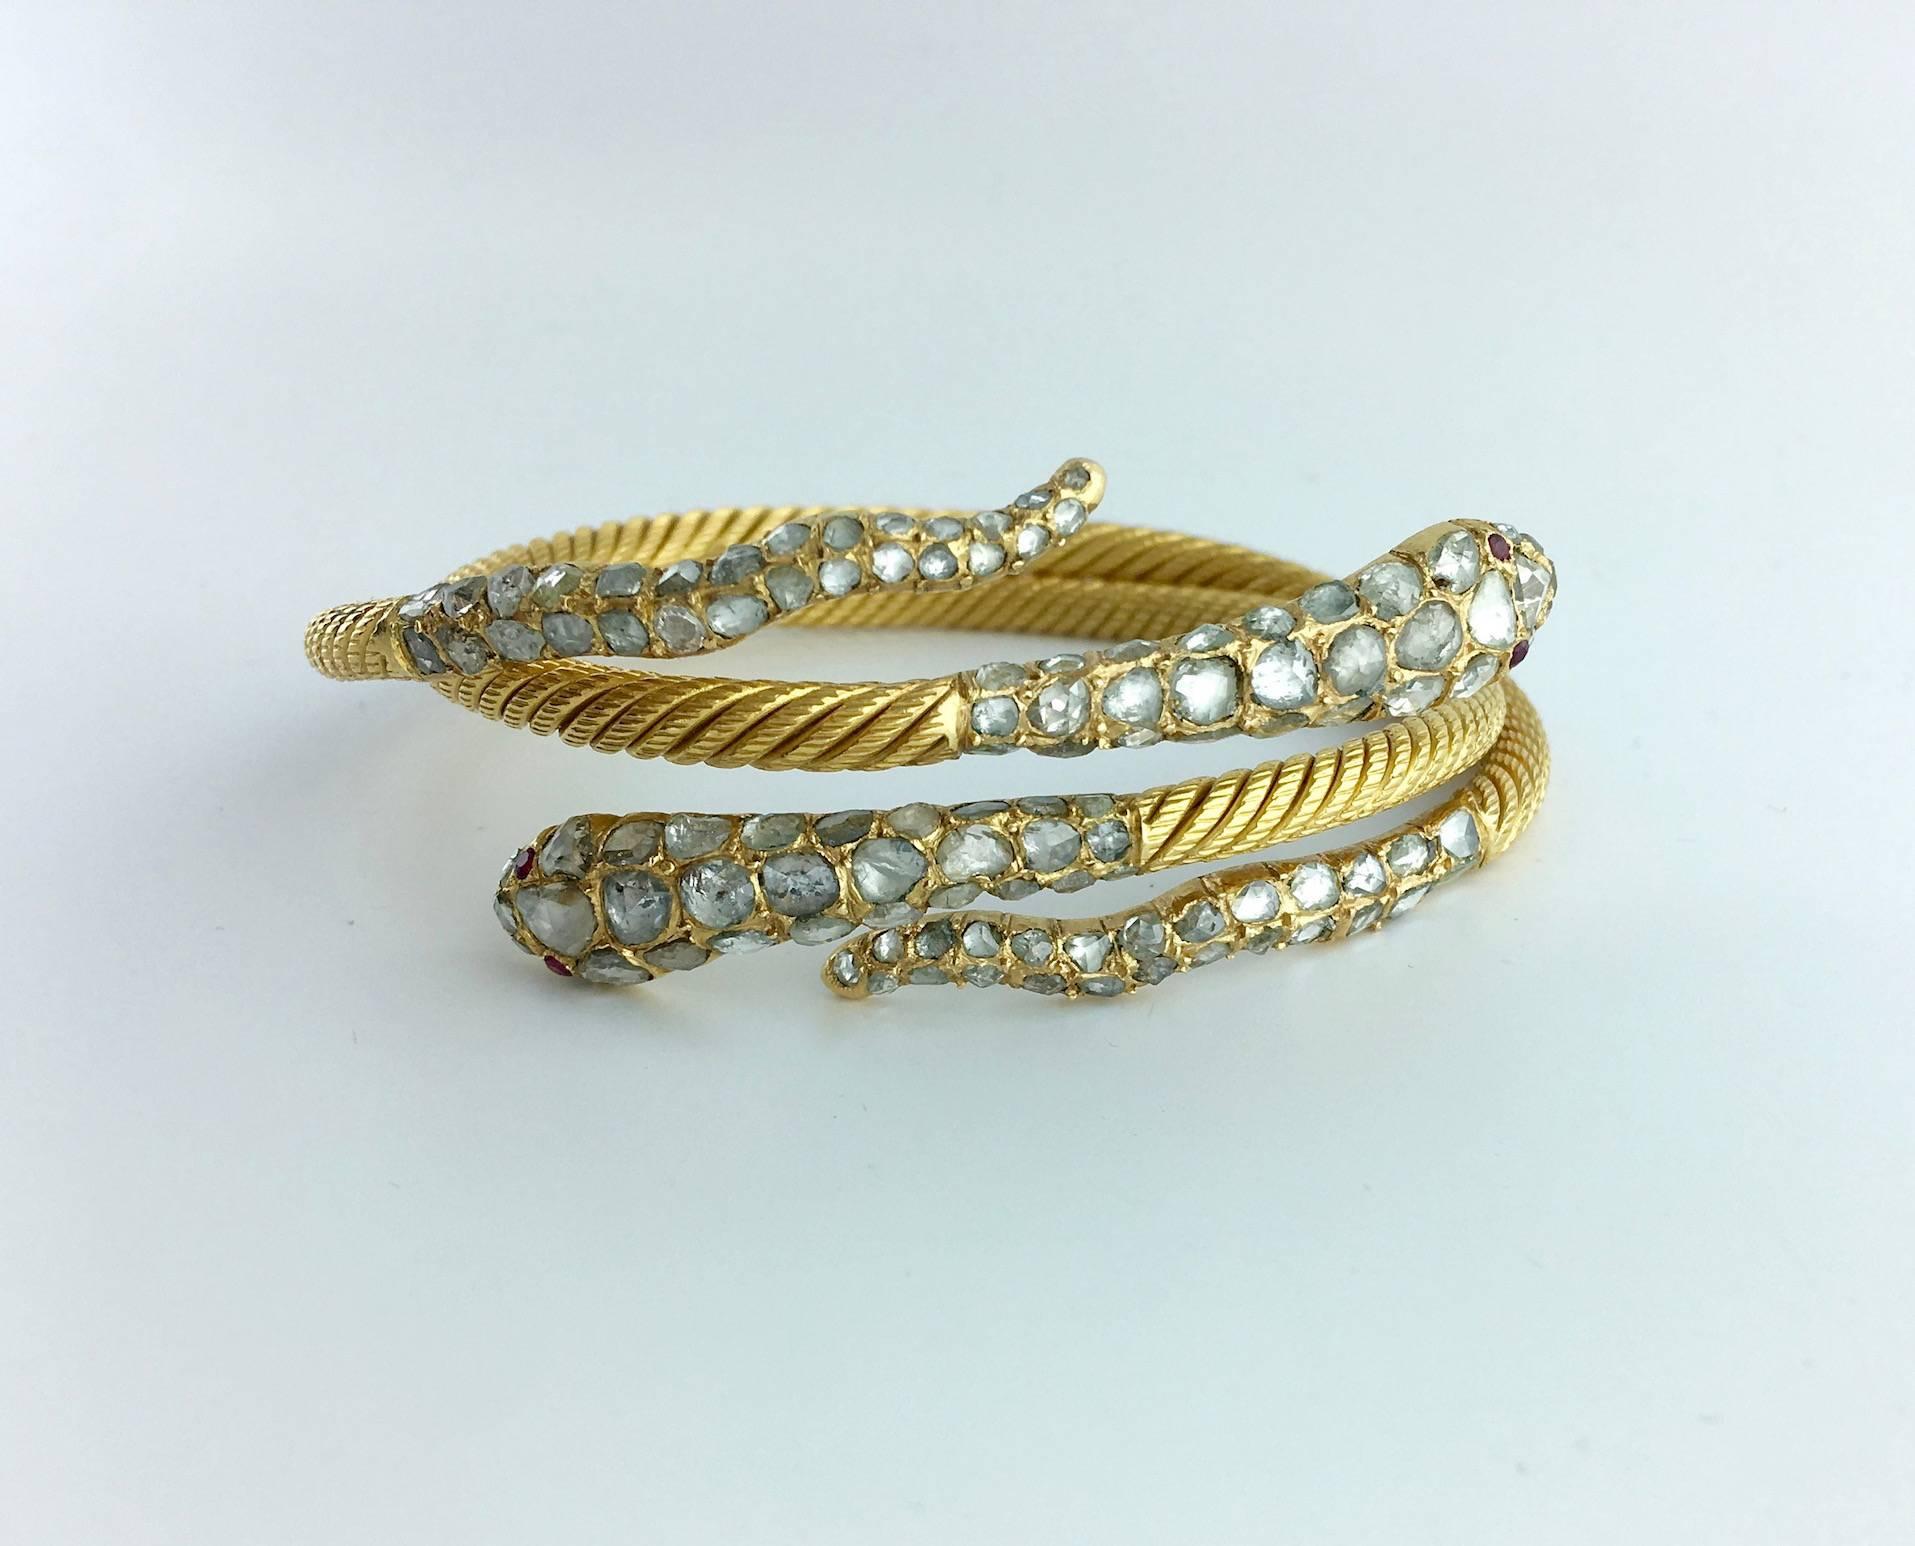 We had a crush (once again) on this pair of Snake Bracelets in yellow gold 22k twisted and set by Rose-cut Diamond (approximately 2.00 carats total). Gathered or worn on each wrist those jewels will increase your Sex-appeal!

Gross weight: 93.69